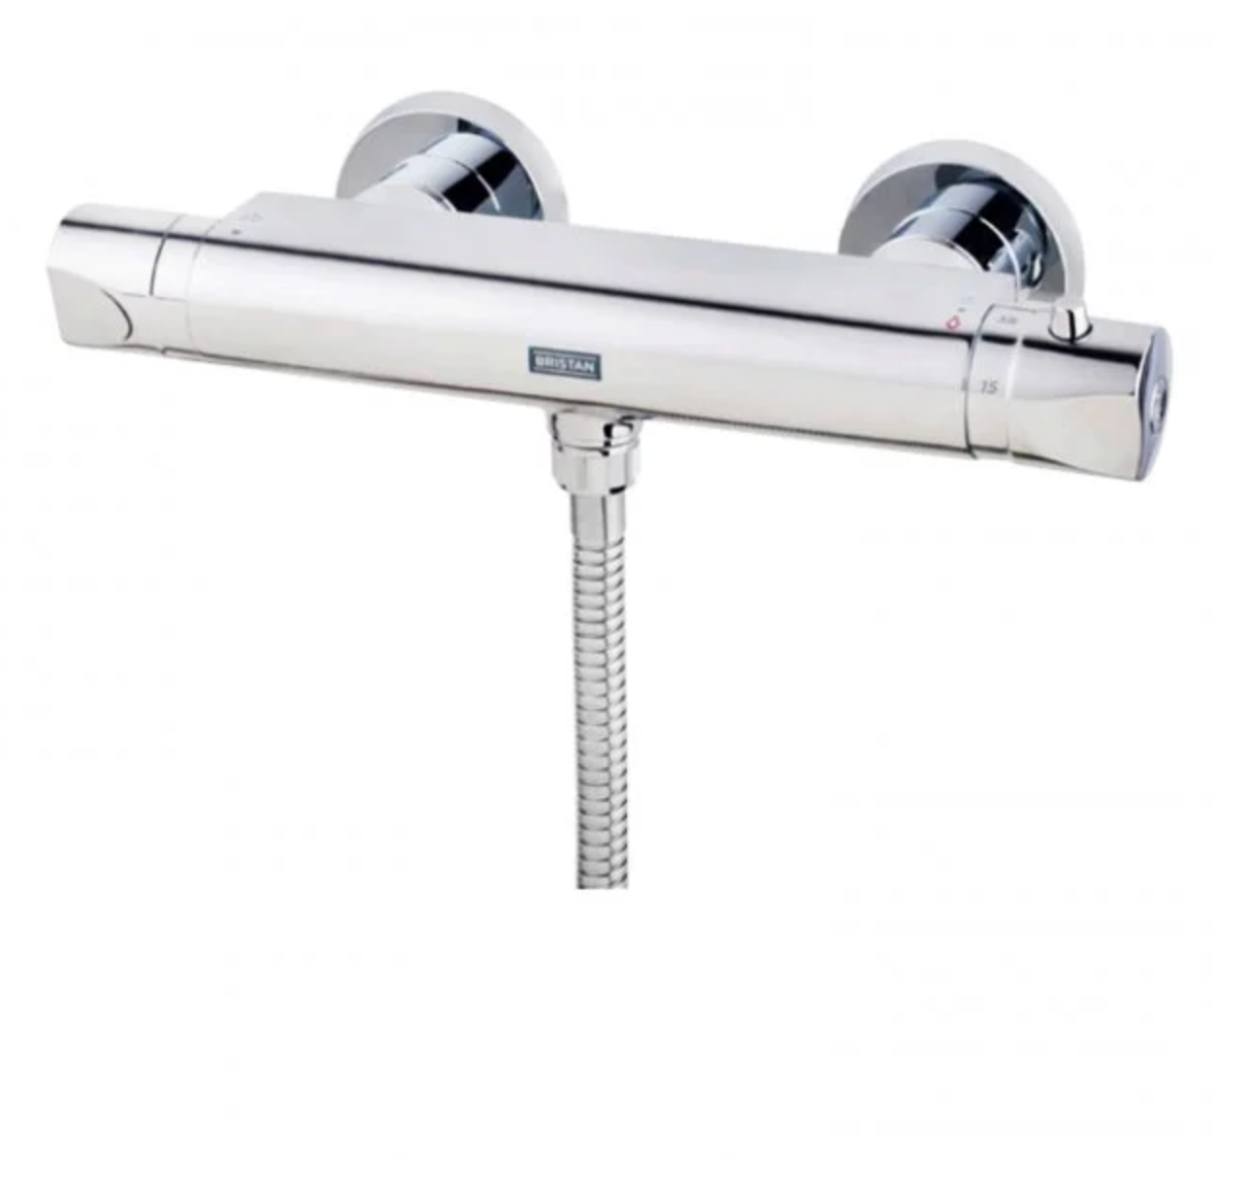 Bristan Artisan Thermostatic Surface Mounted Bar Shower Valve & Fast Fit Connections - Chrome - AR2 SHXVOFF C 